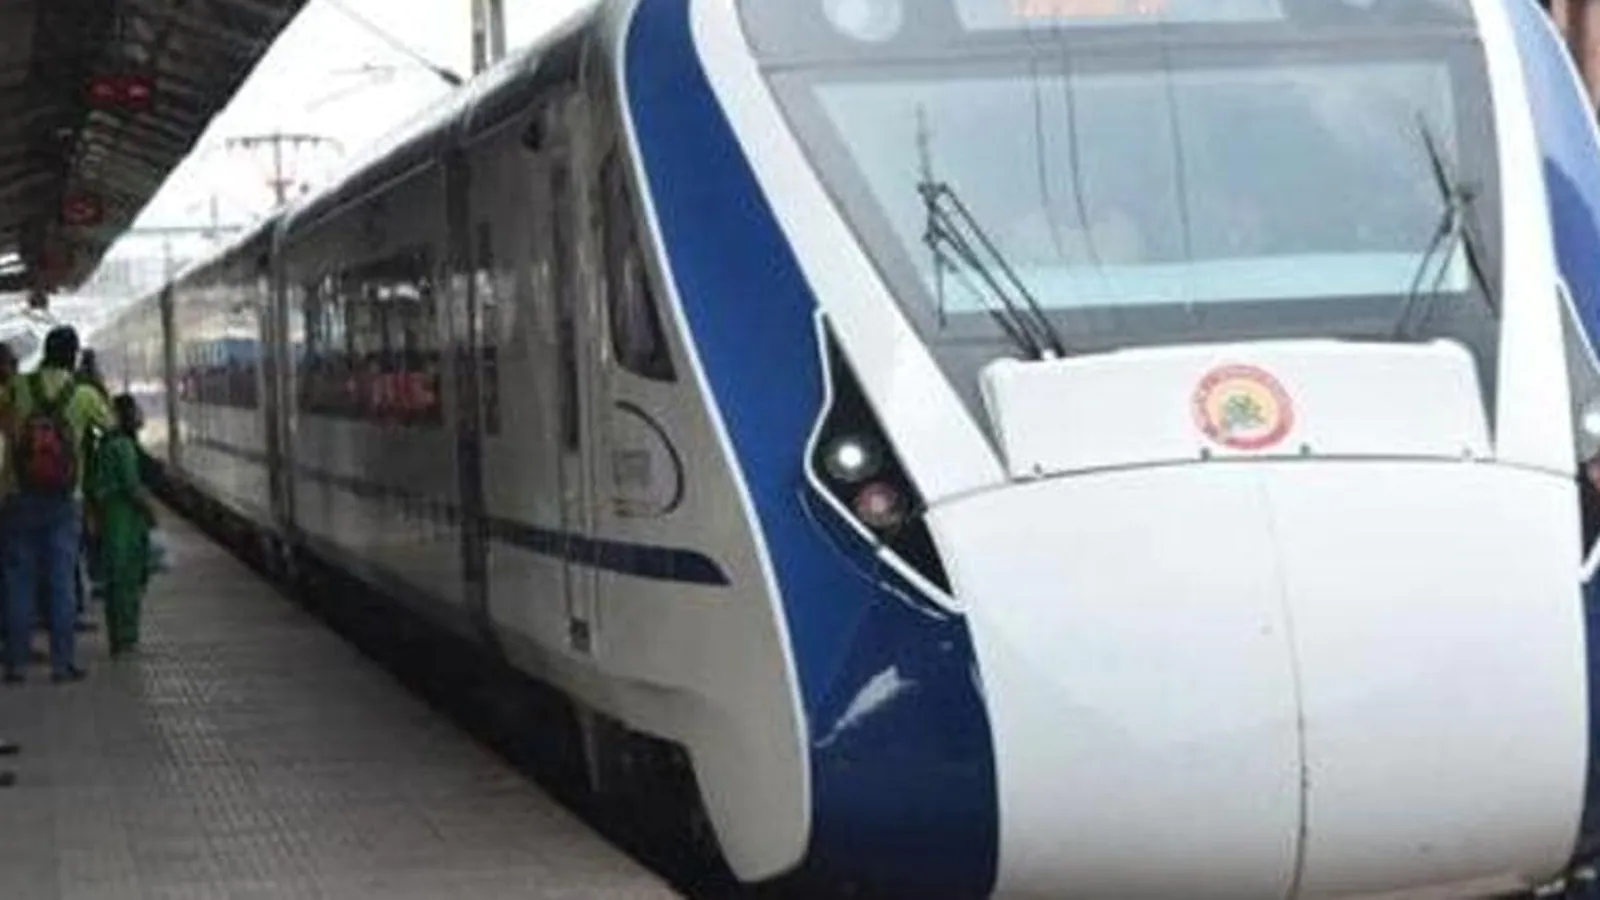 Stuck in Ukraine, wheels of Vande Bharat trains to be airlifted to India